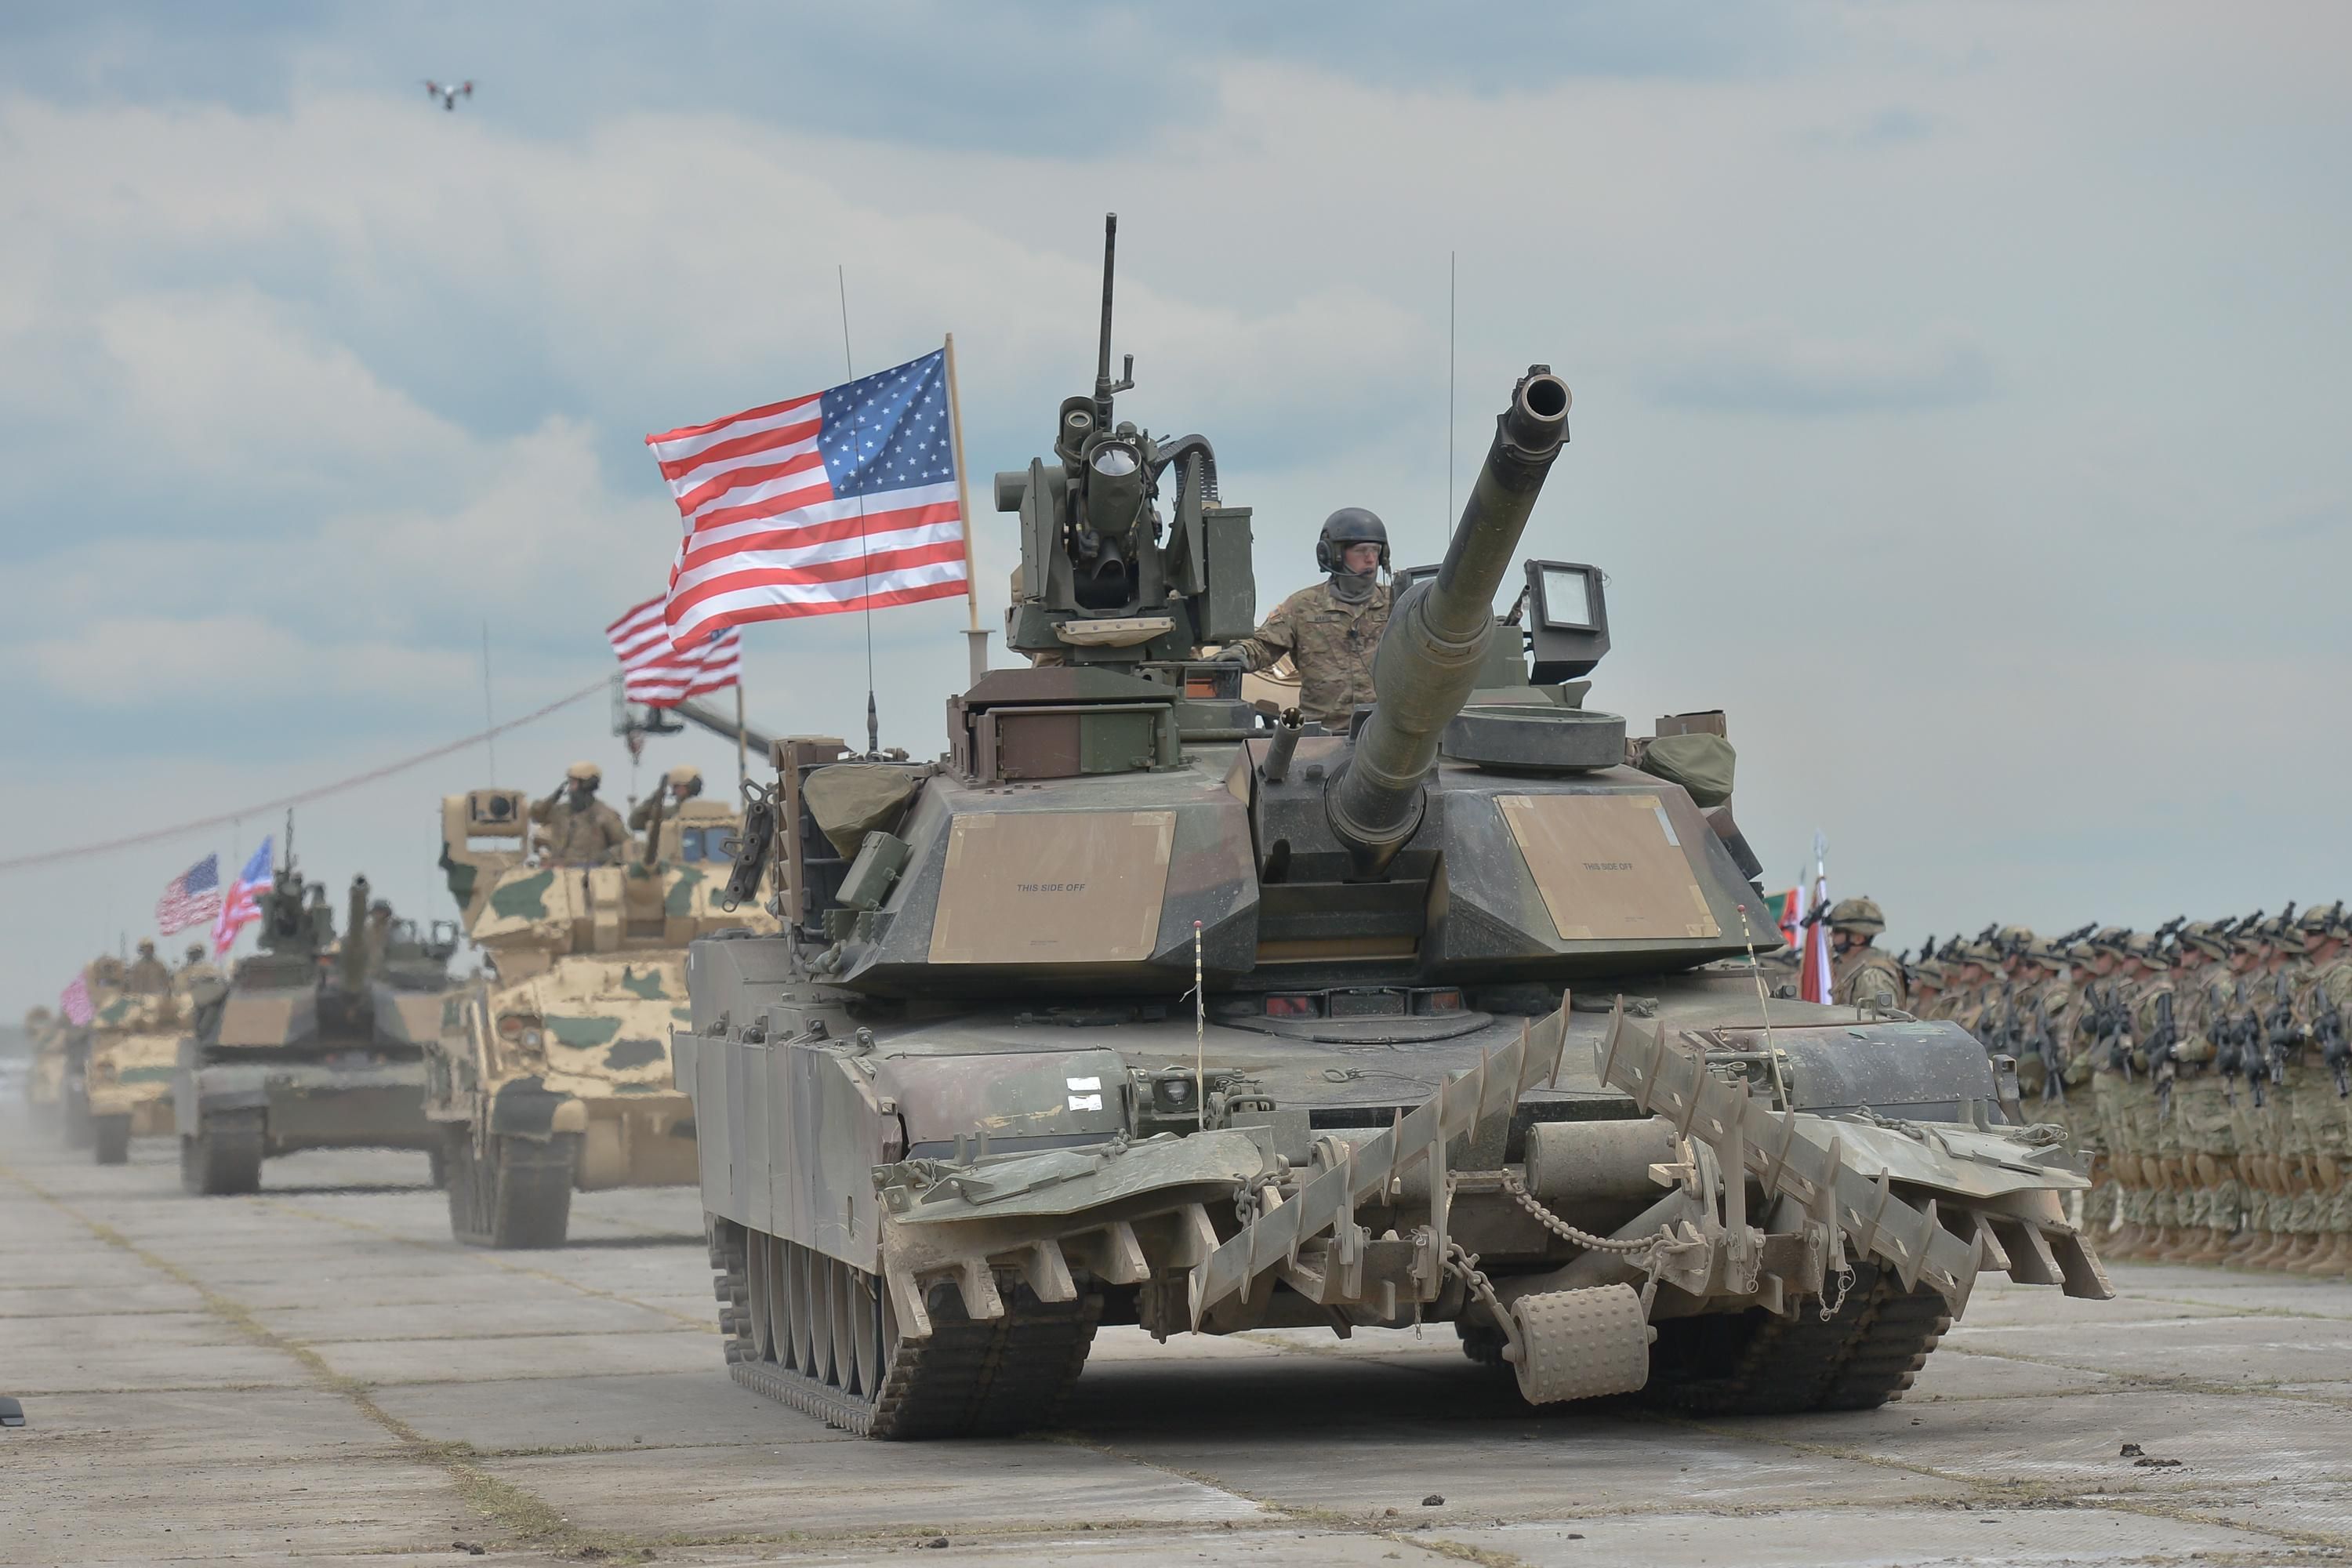 U.S. tanks appear during a military exercise